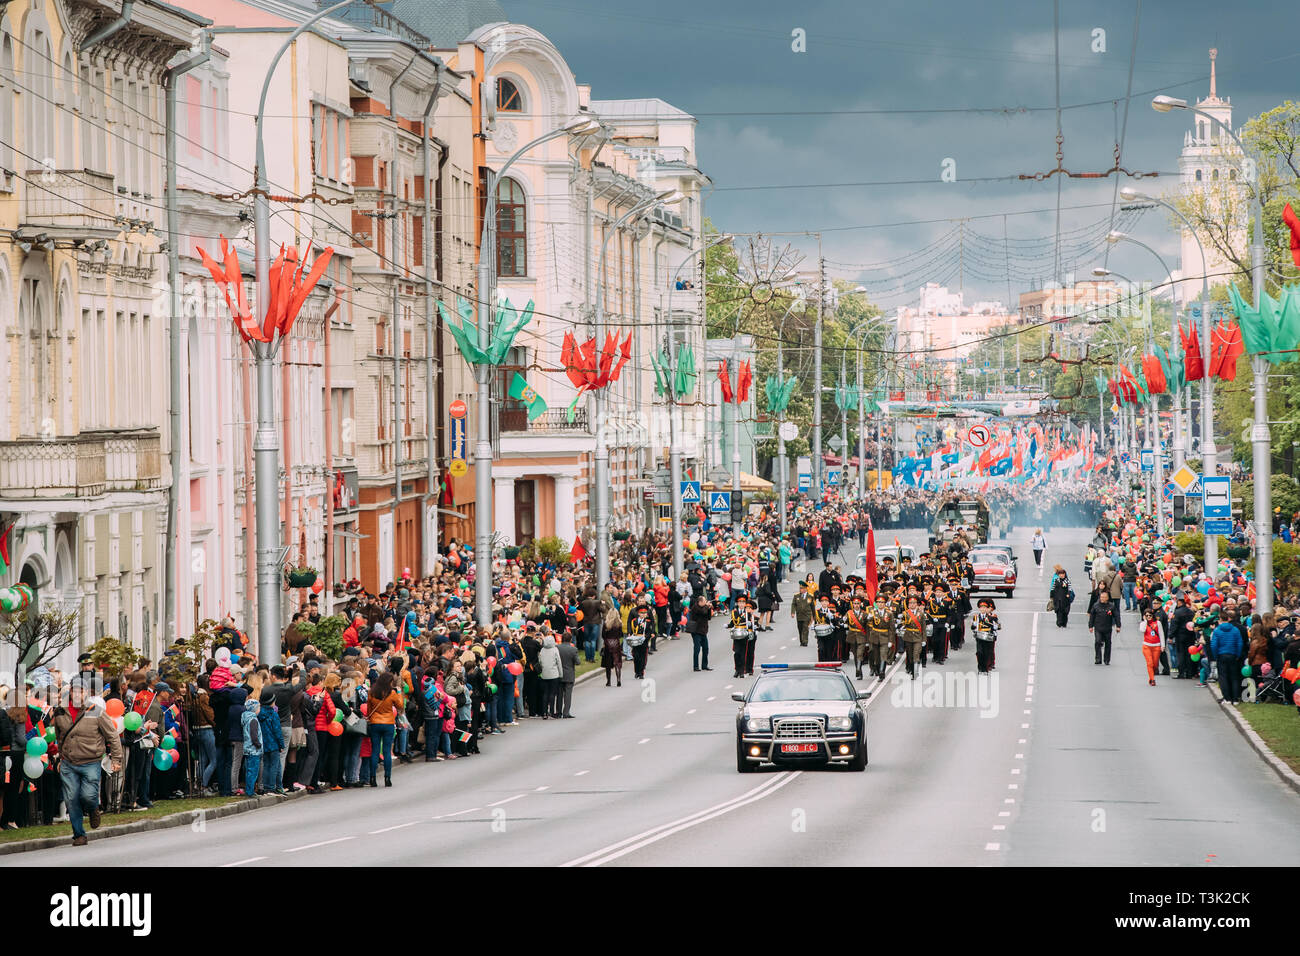 Gomel, Belarus. Ceremonial Procession Of Parade. Military, Civilian People And Enginery On Festive Decorated Street. Celebration Victory Day. Stock Photo